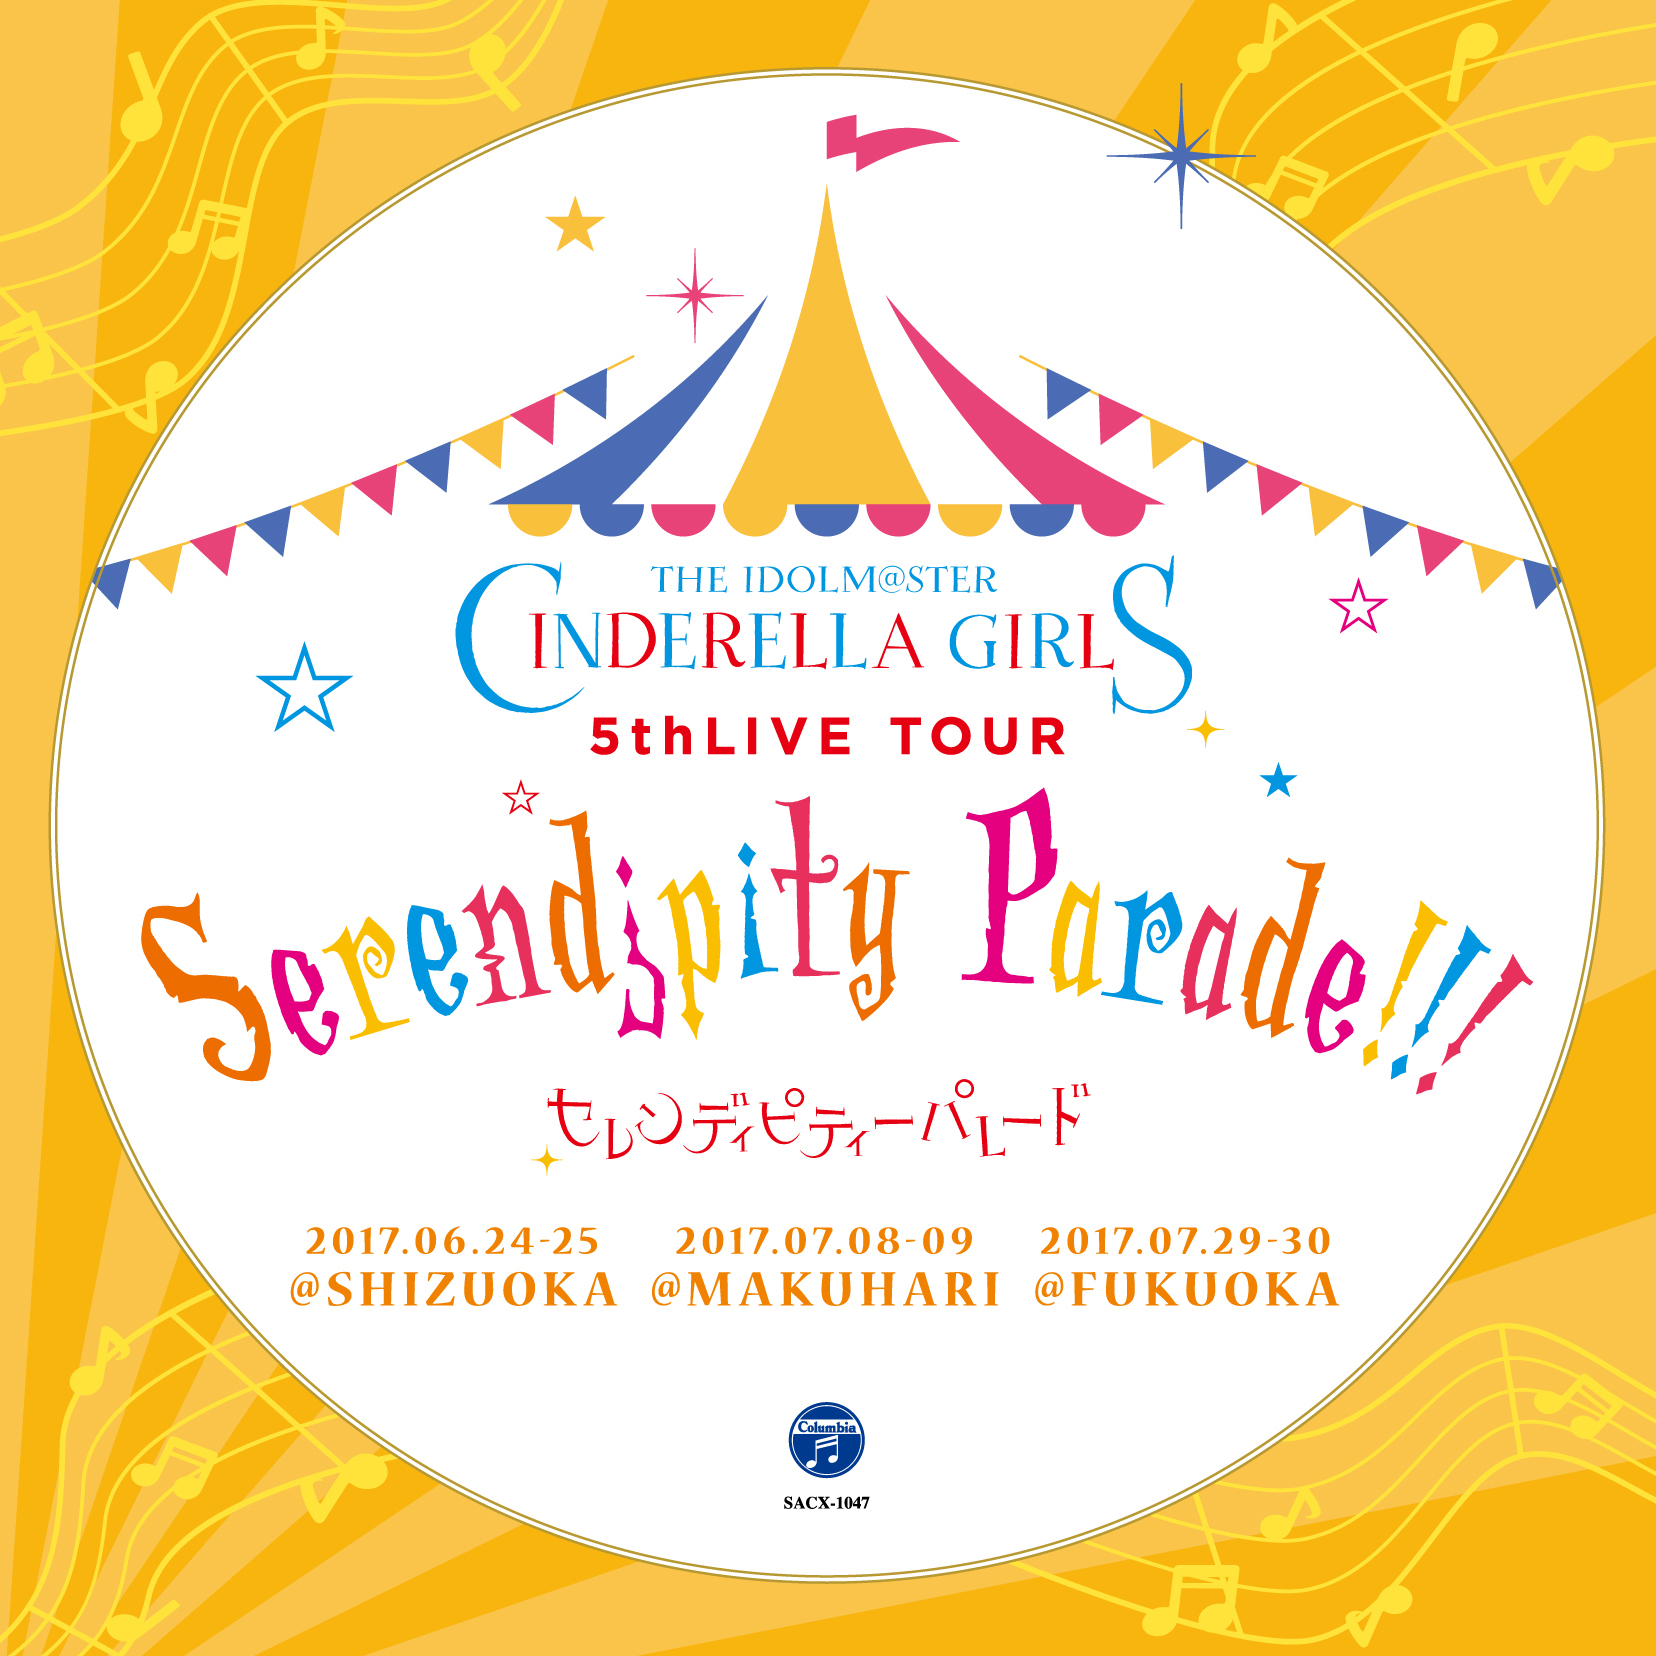 THE IDOLM@STER CINDERELLA GIRLS 5thLIVE TOUR Serendipity Parade ...